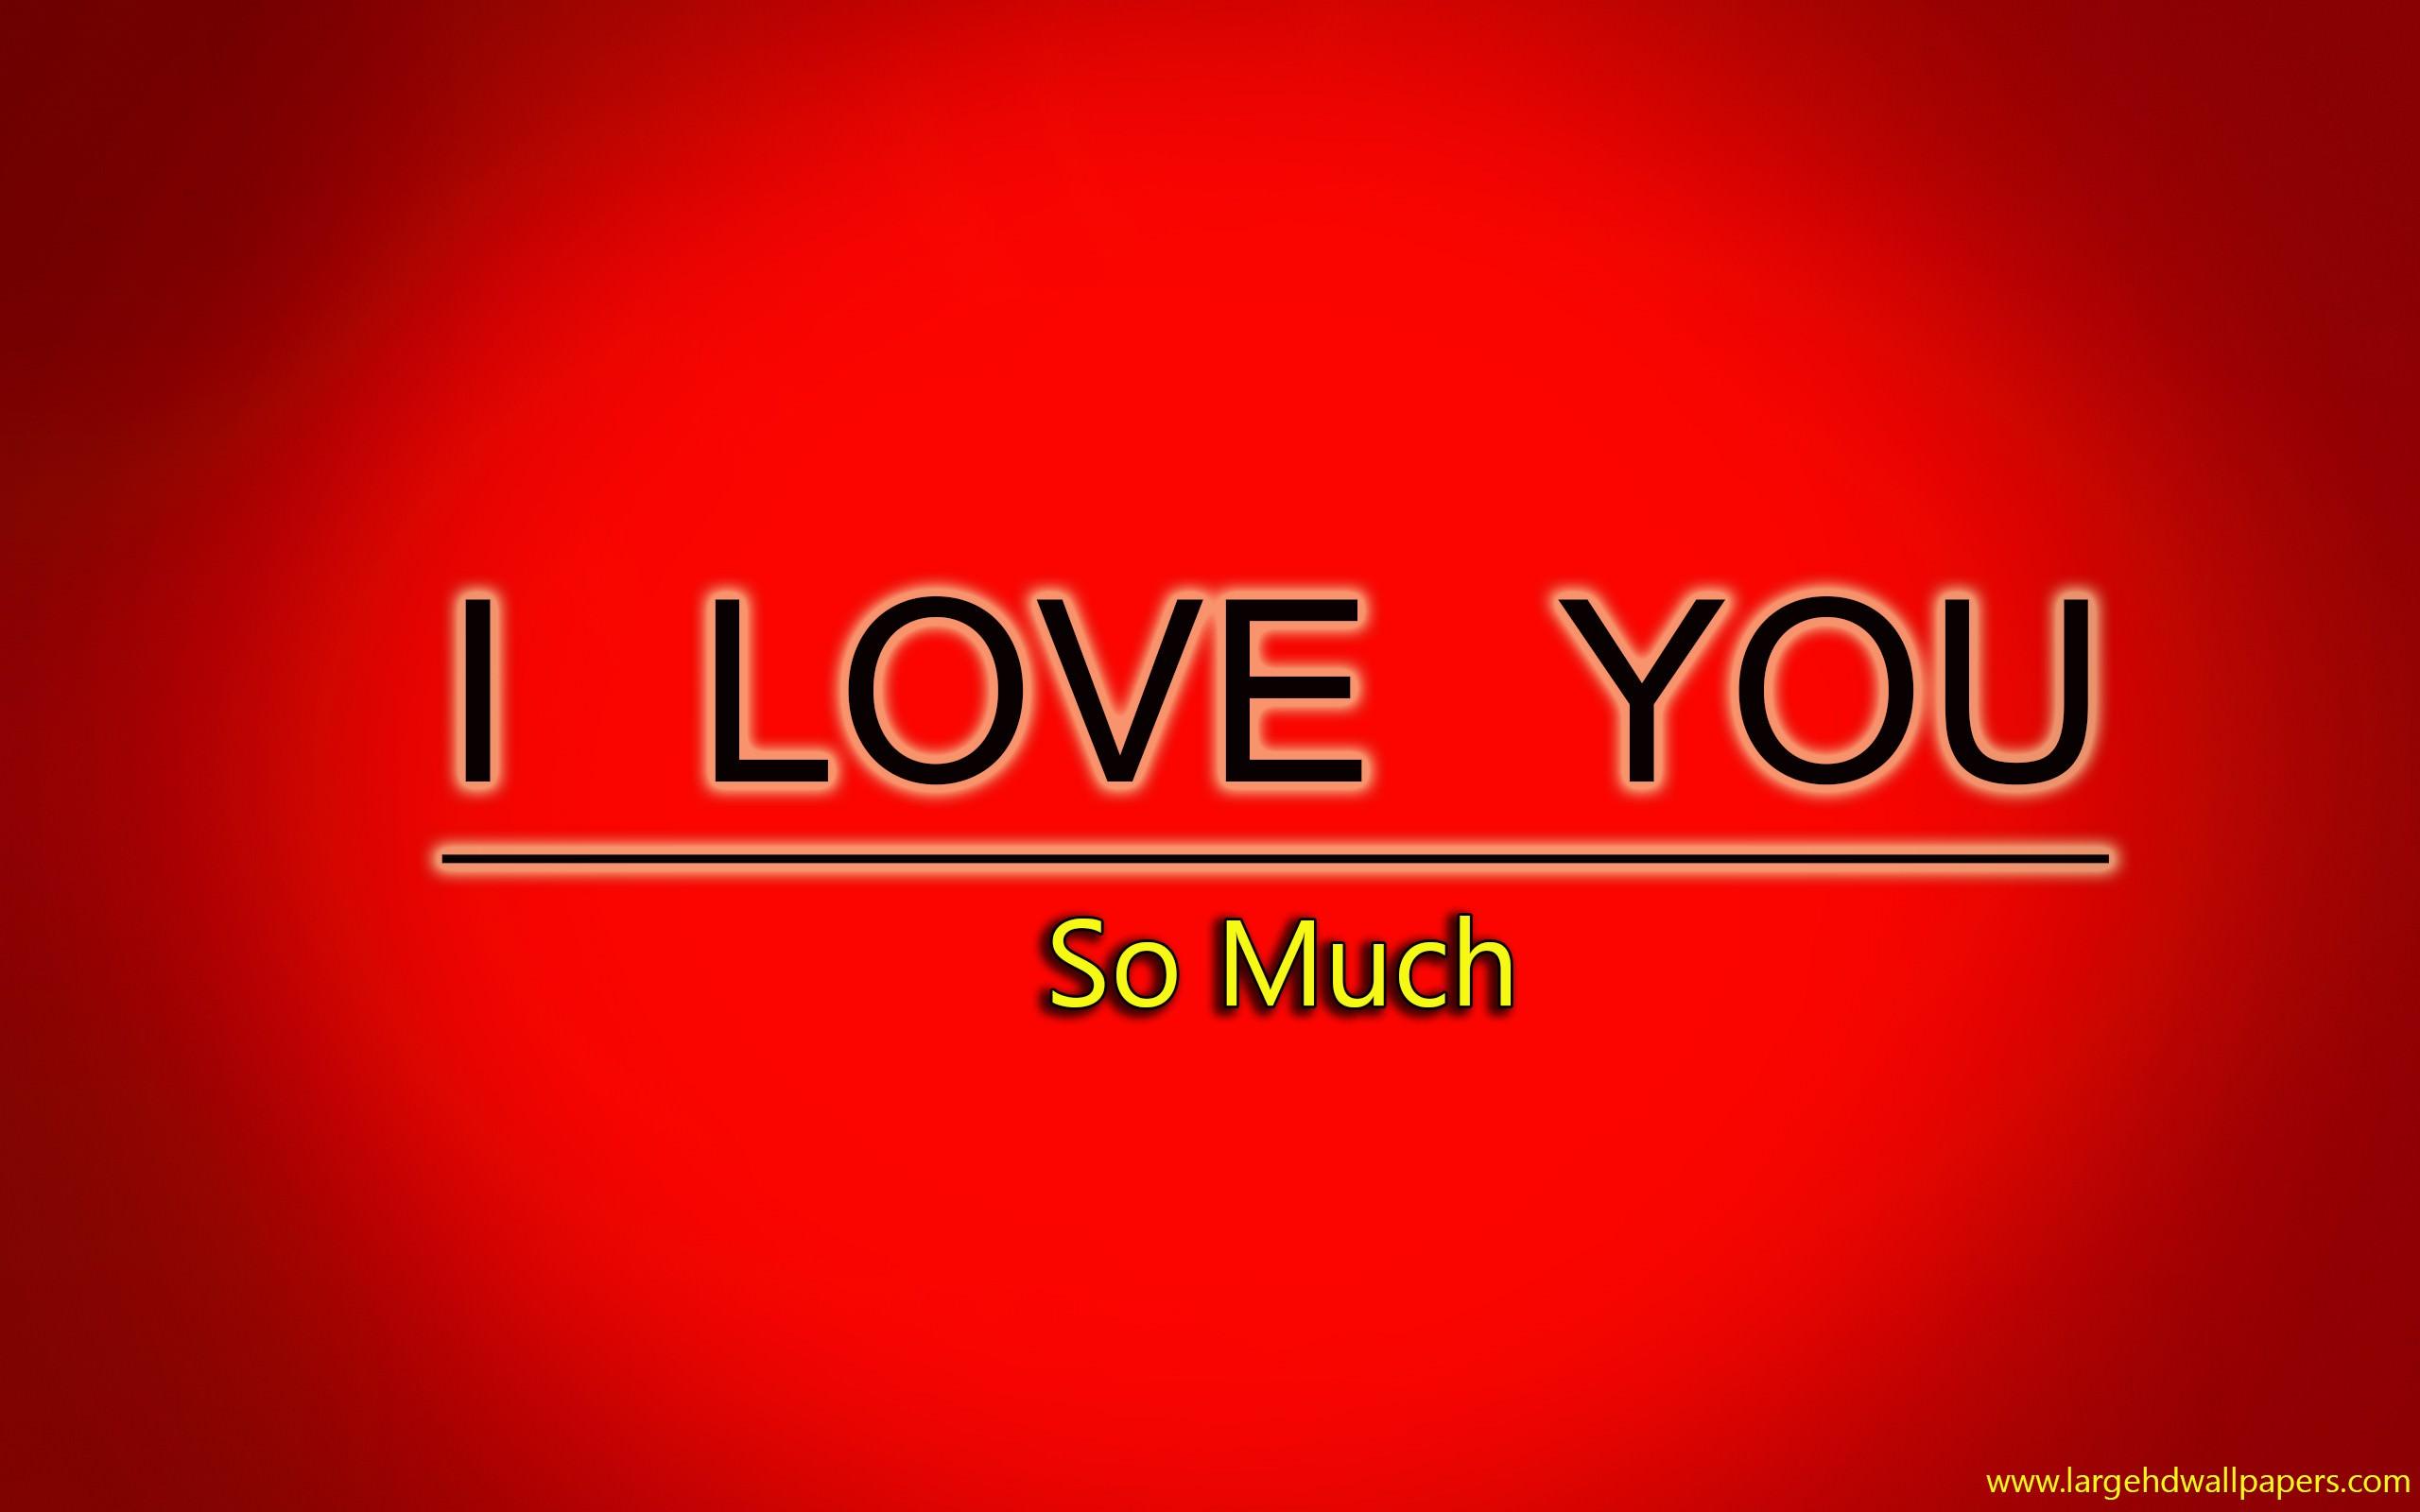 Best I Love You Image Collection for Whatsapp